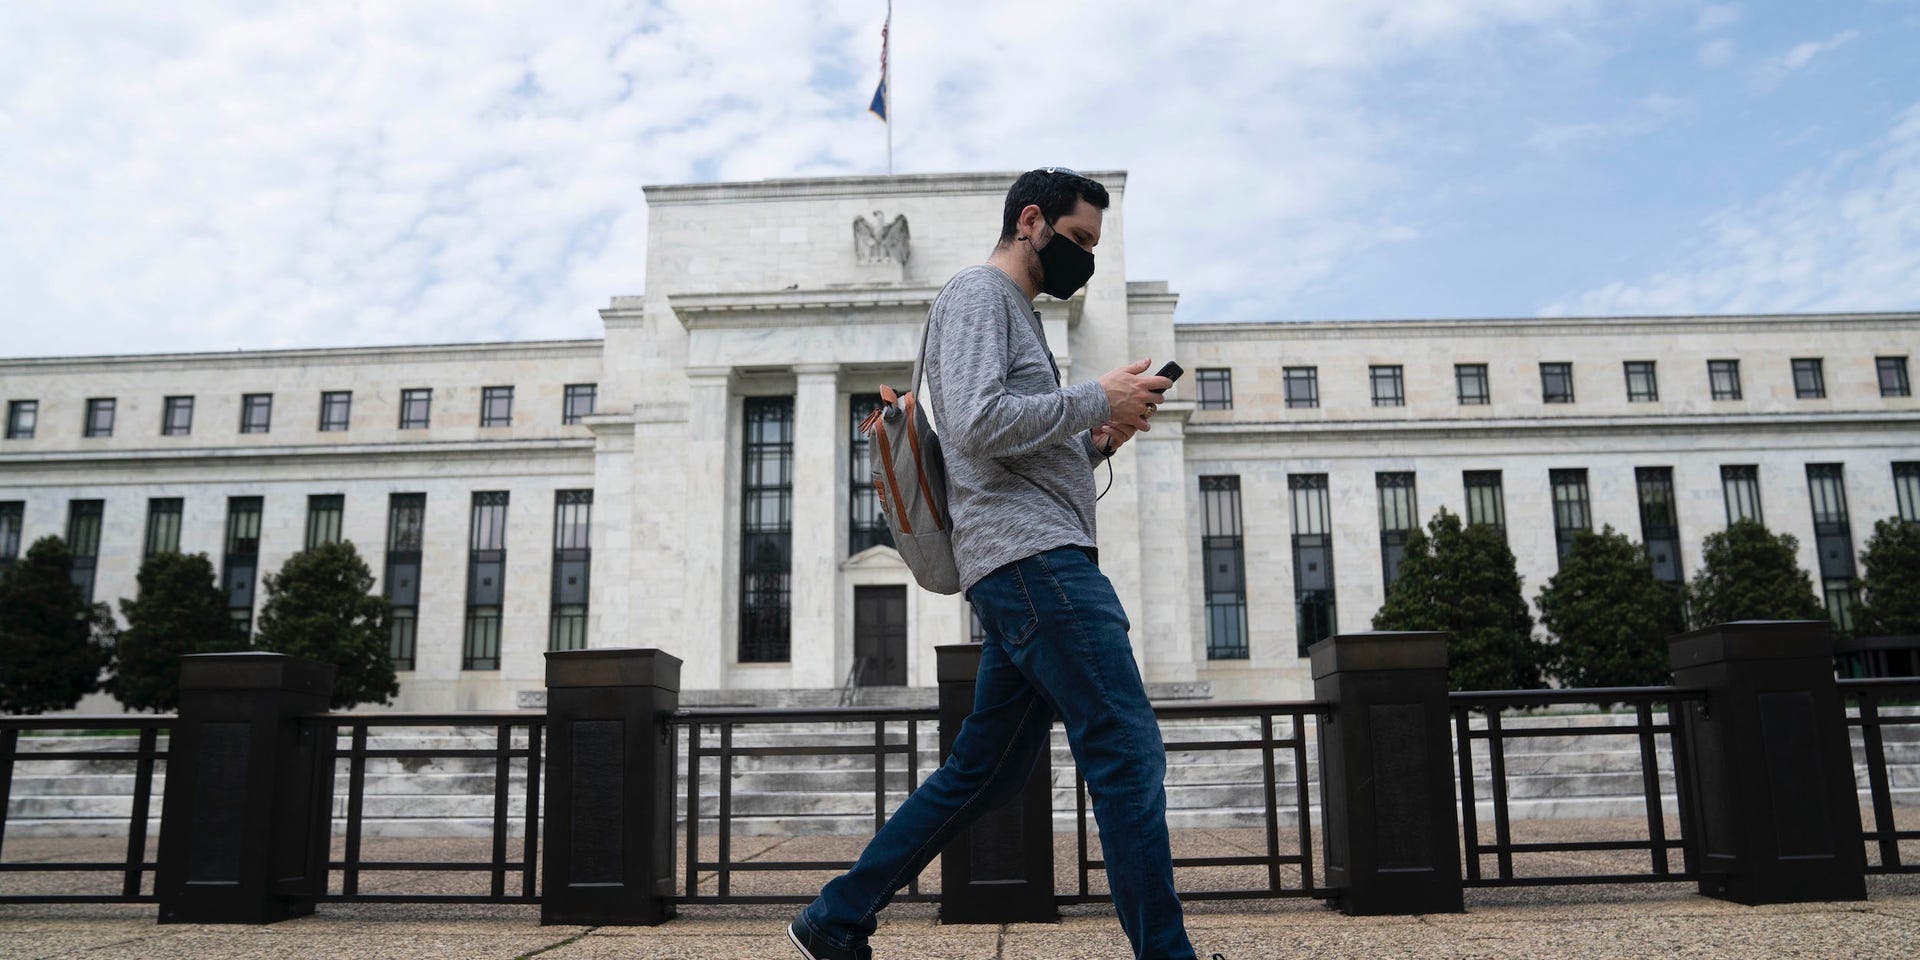 A pedestrian walks by the Federal Reserve building.